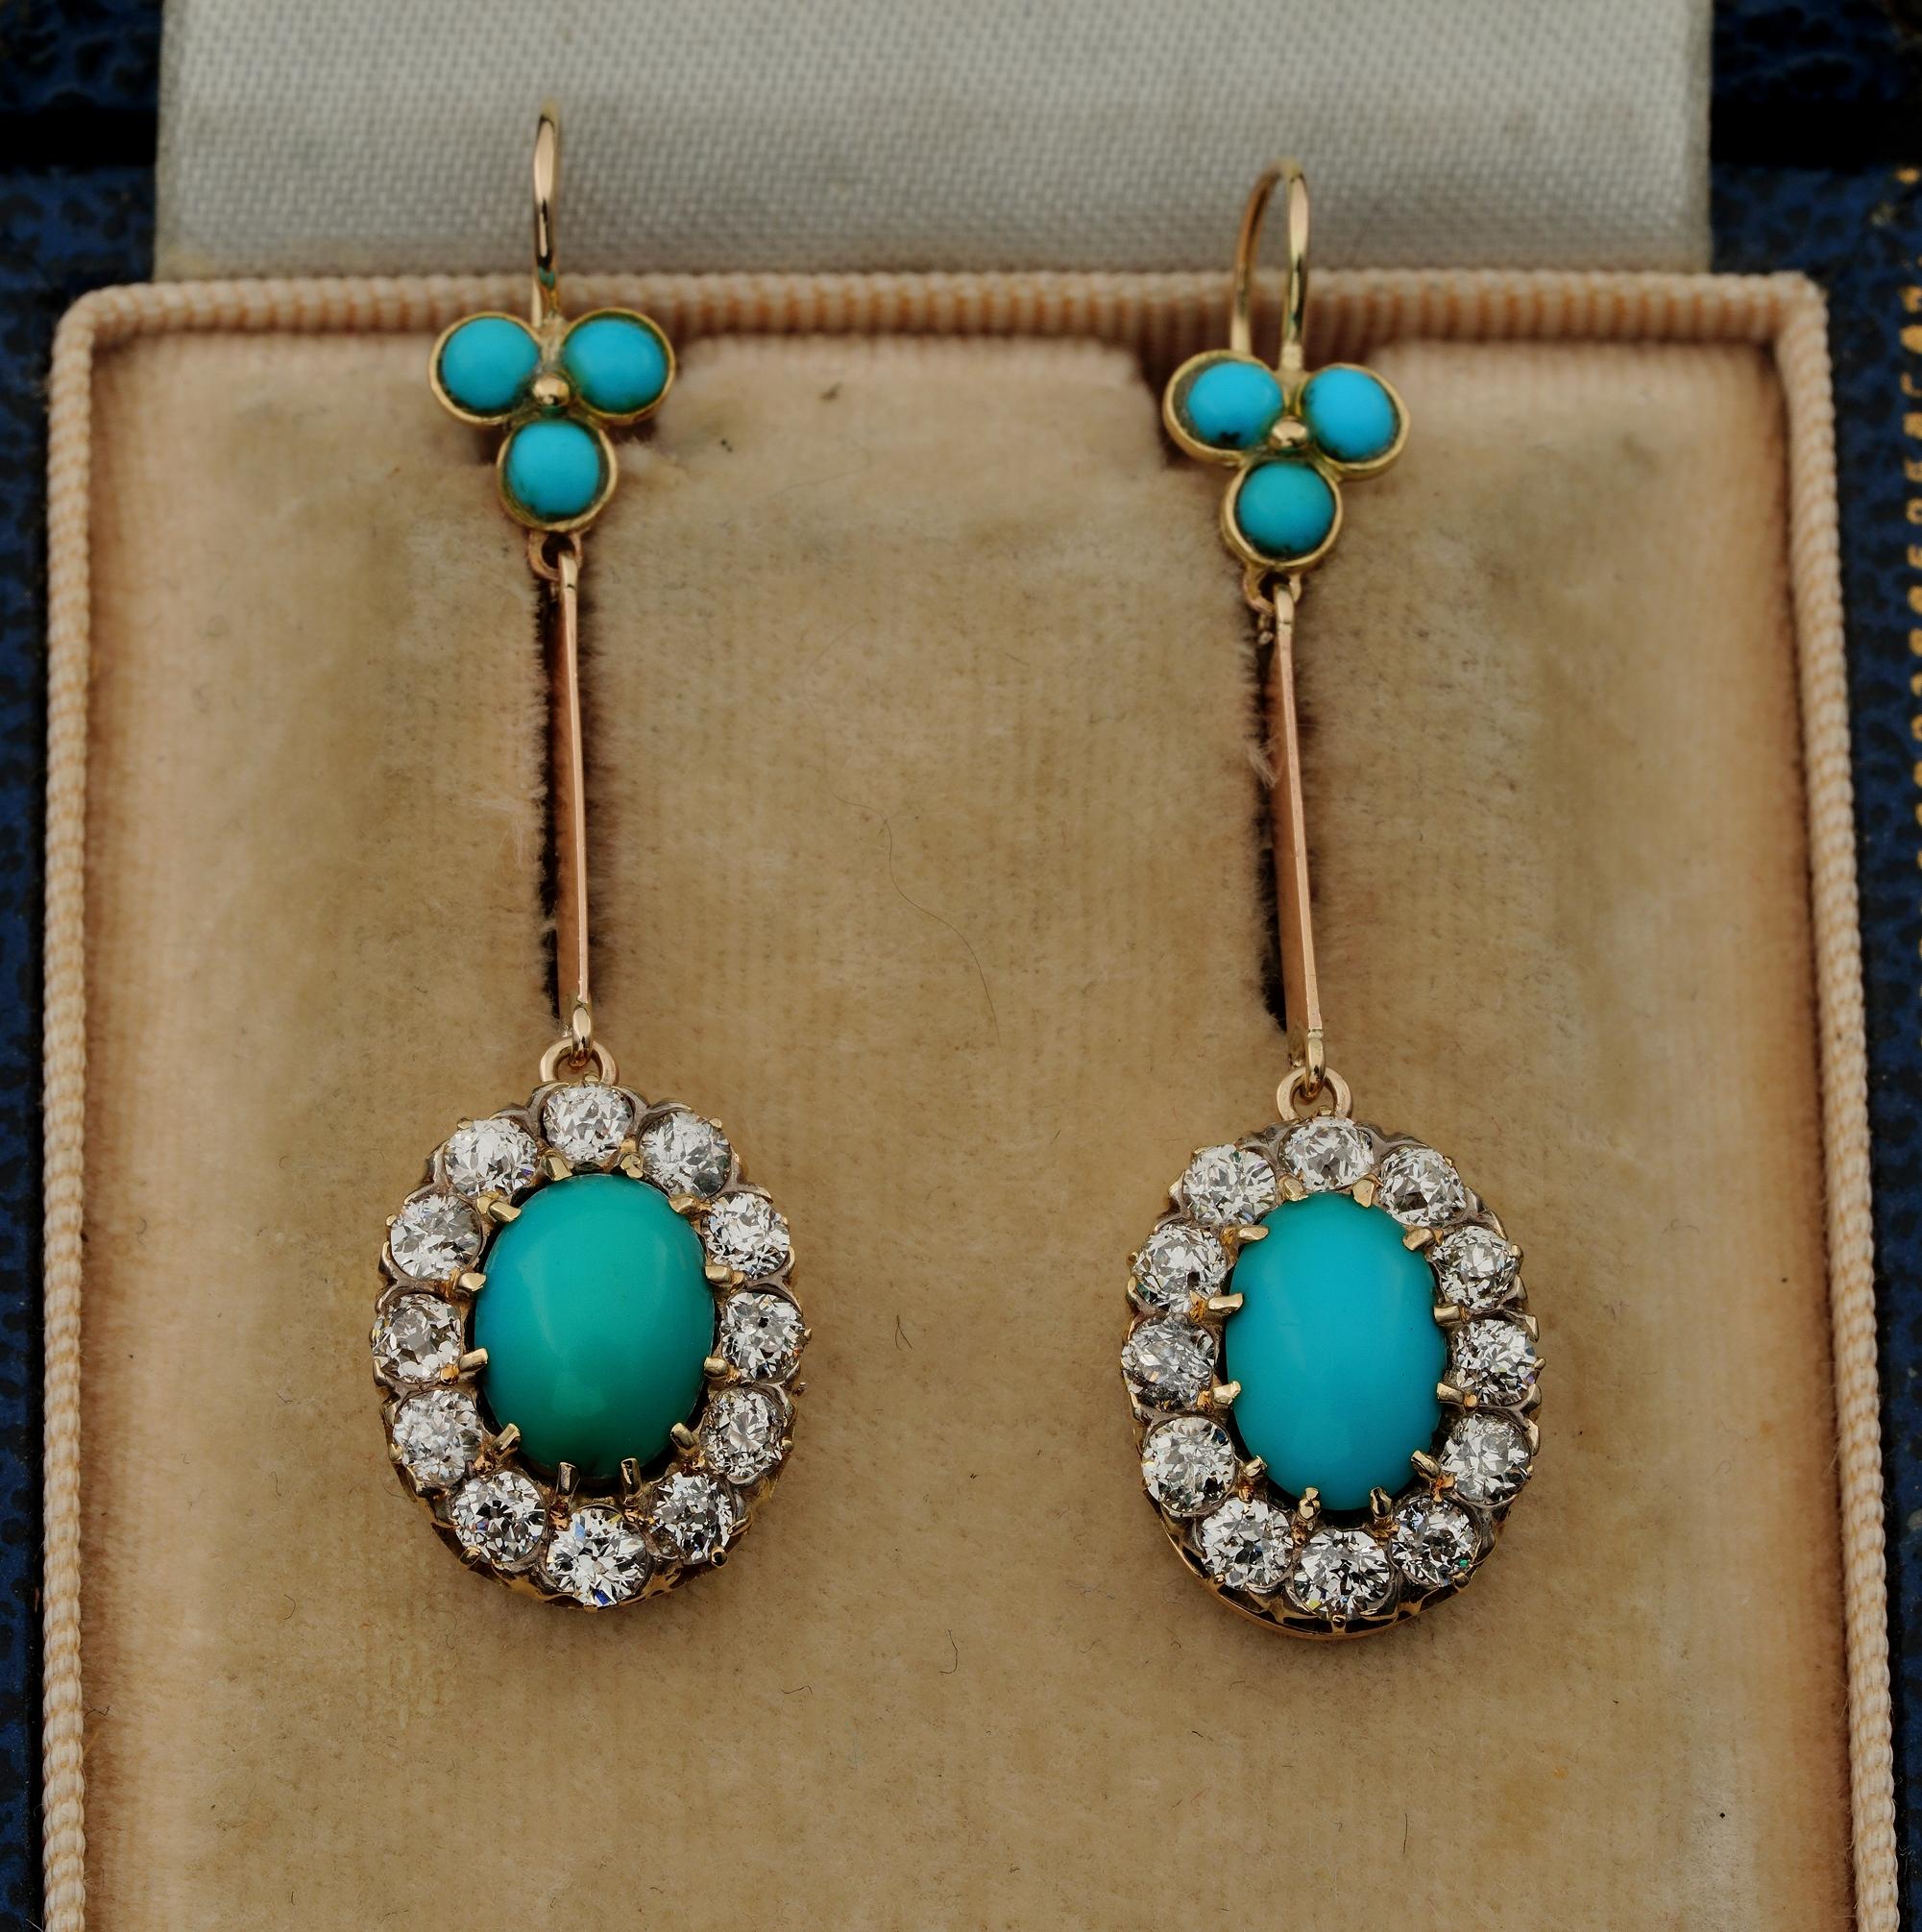 Victorian period, gorgeous and rare drop earrings to cherish and treasure for ever
Simply designed with a top trilogy of Turquoise in connection to a long bar leading to the main cluster
Sweet and lovely with great amount of glowing sparkle